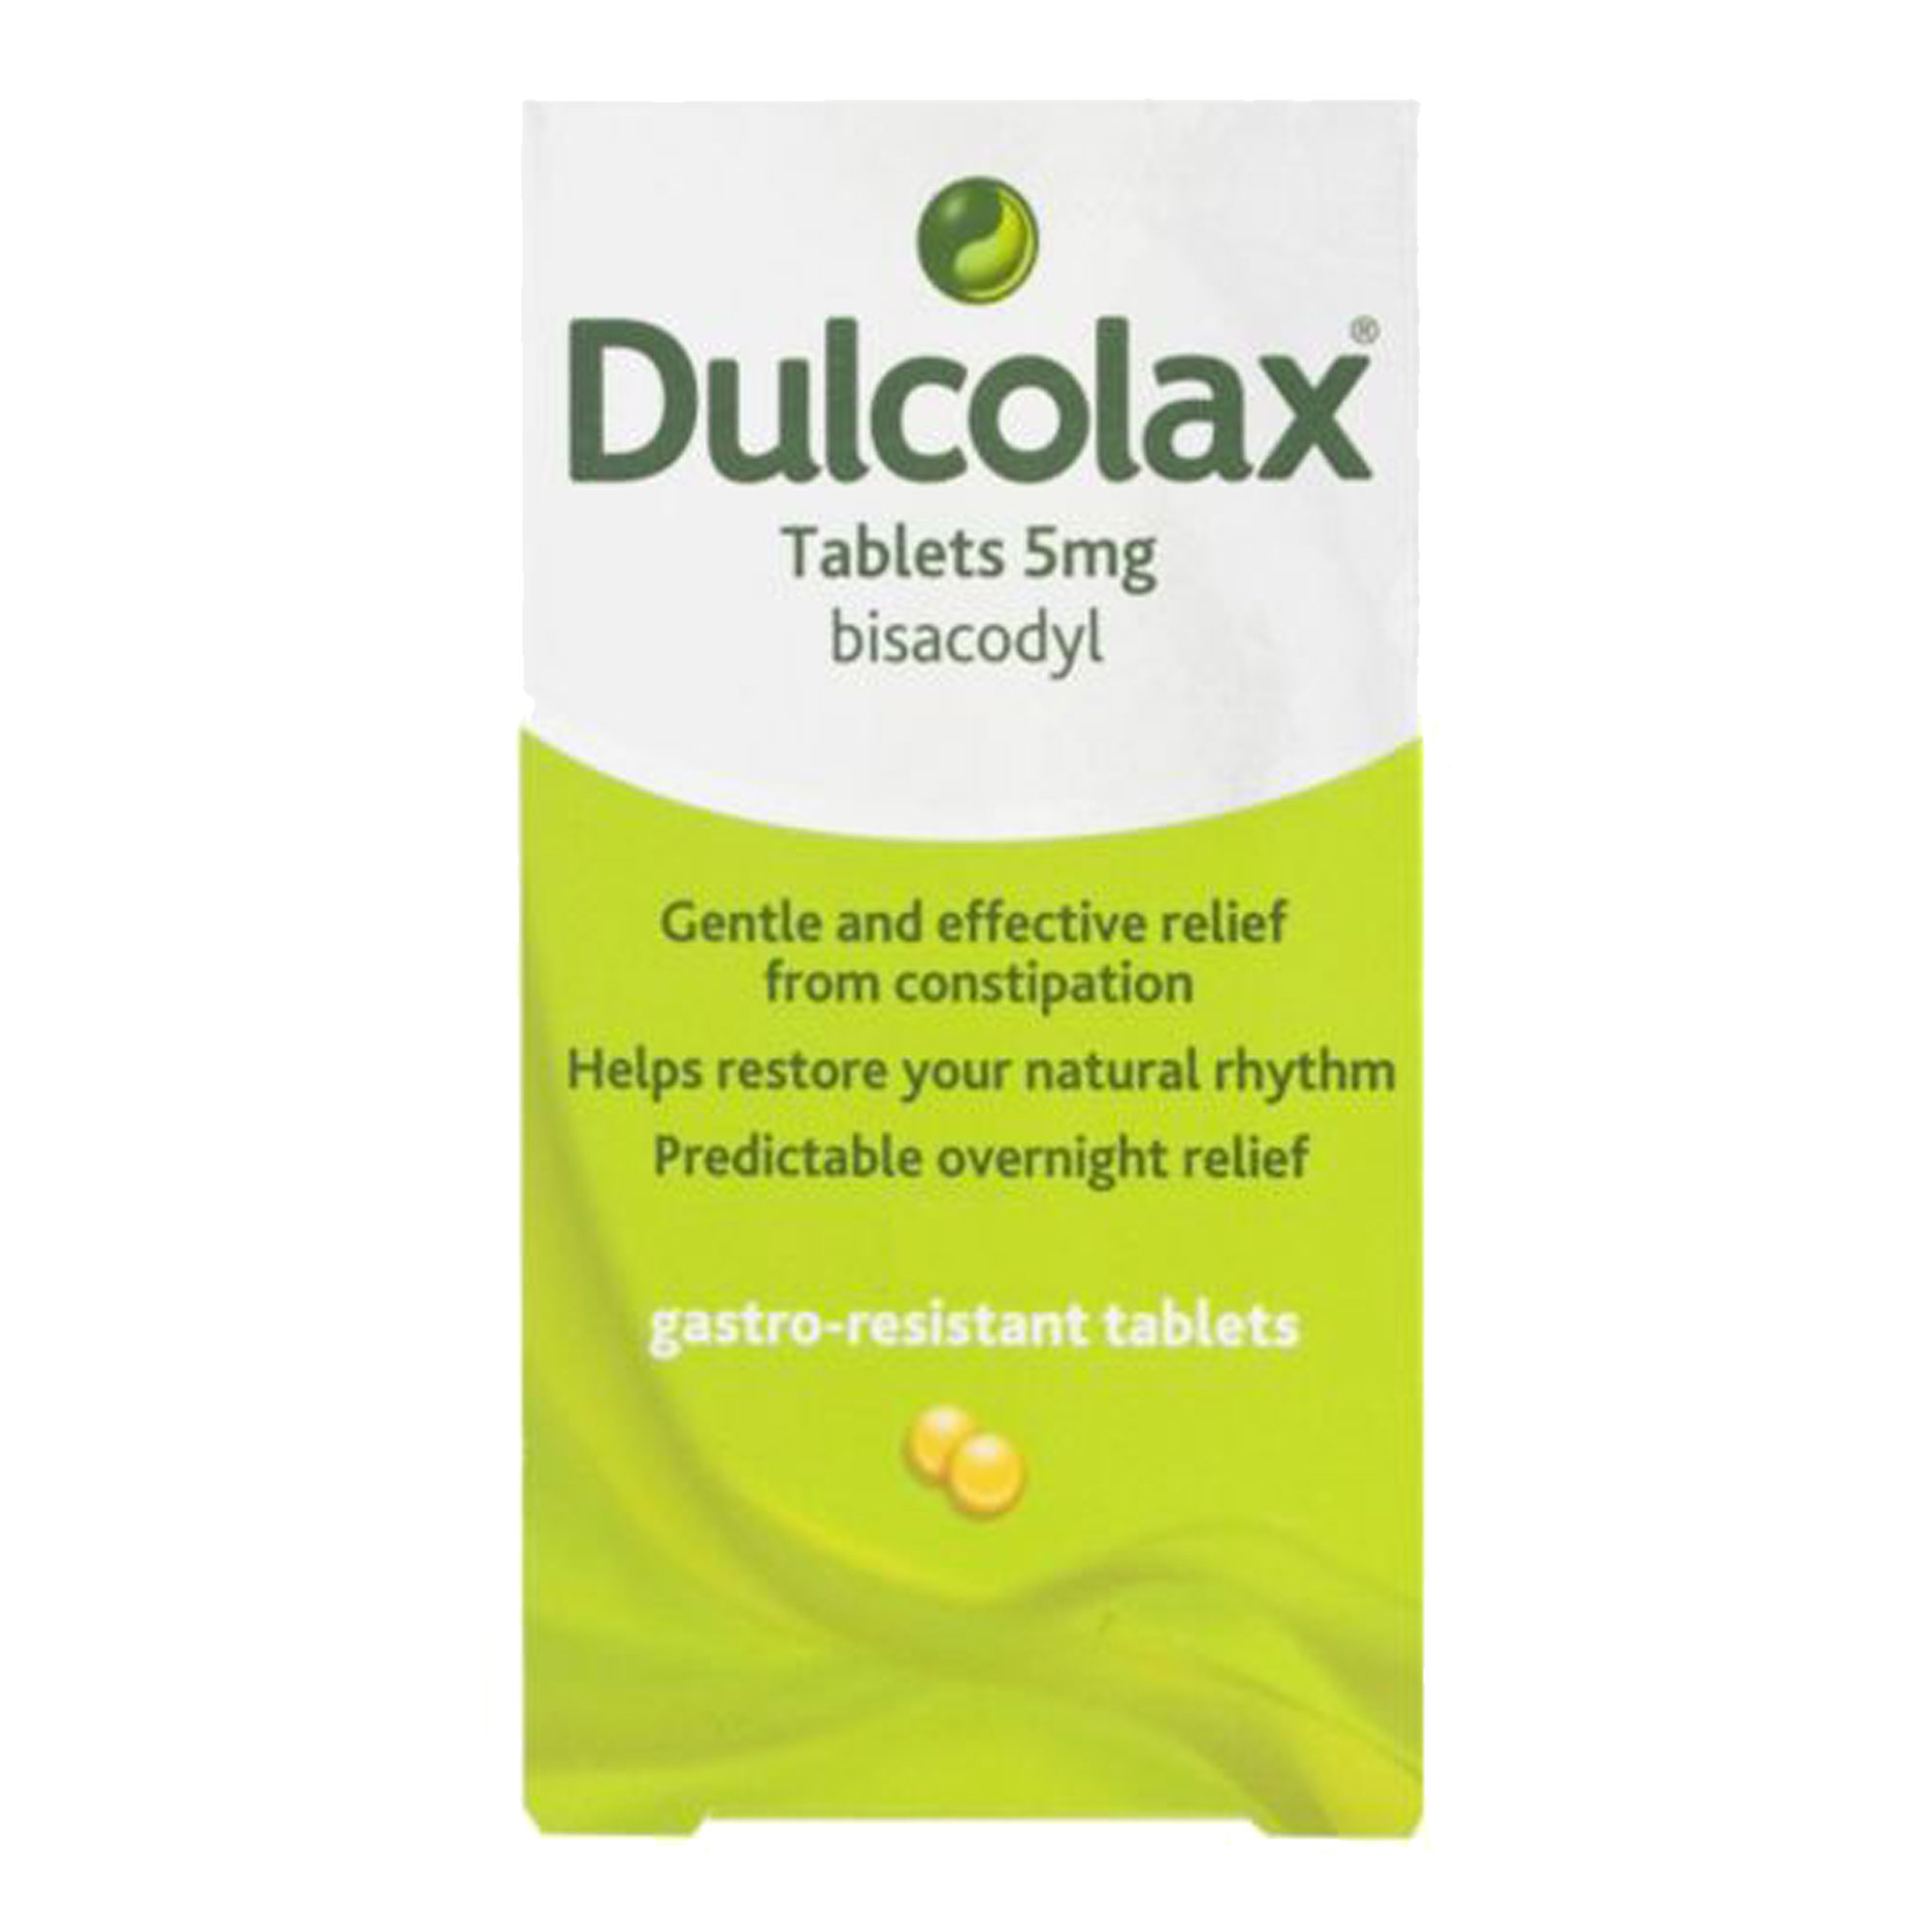 Dulcolax 5mg Bisacodyl Constipation Relief Laxatives ...